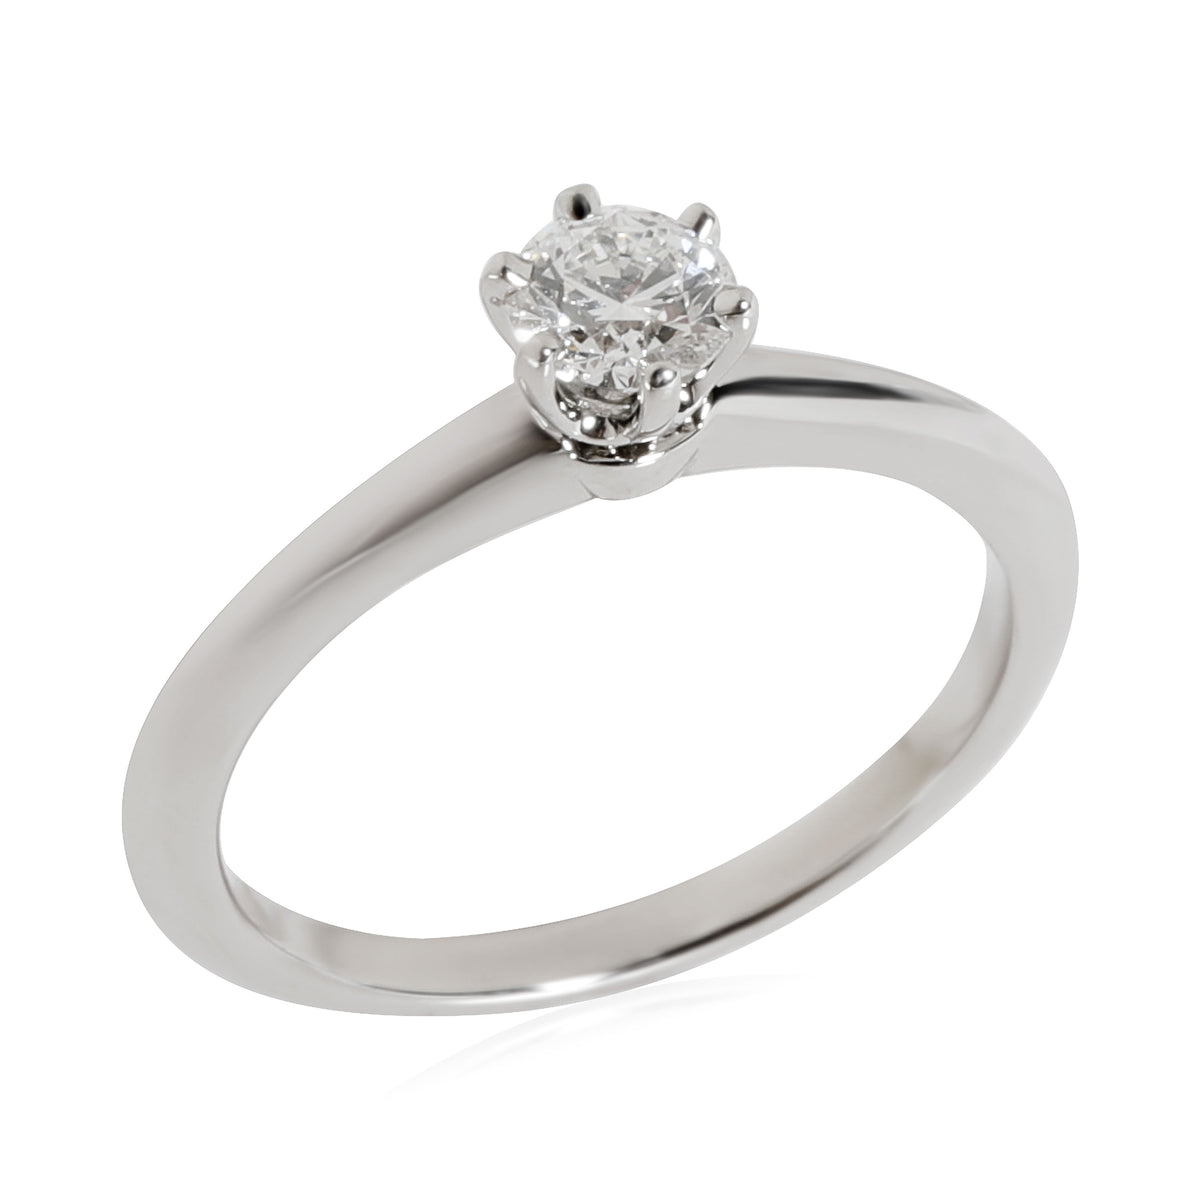 Tiffany & Co. Diamond Engagement Solitaire Ring in Platinum H VS1 0.30 ct